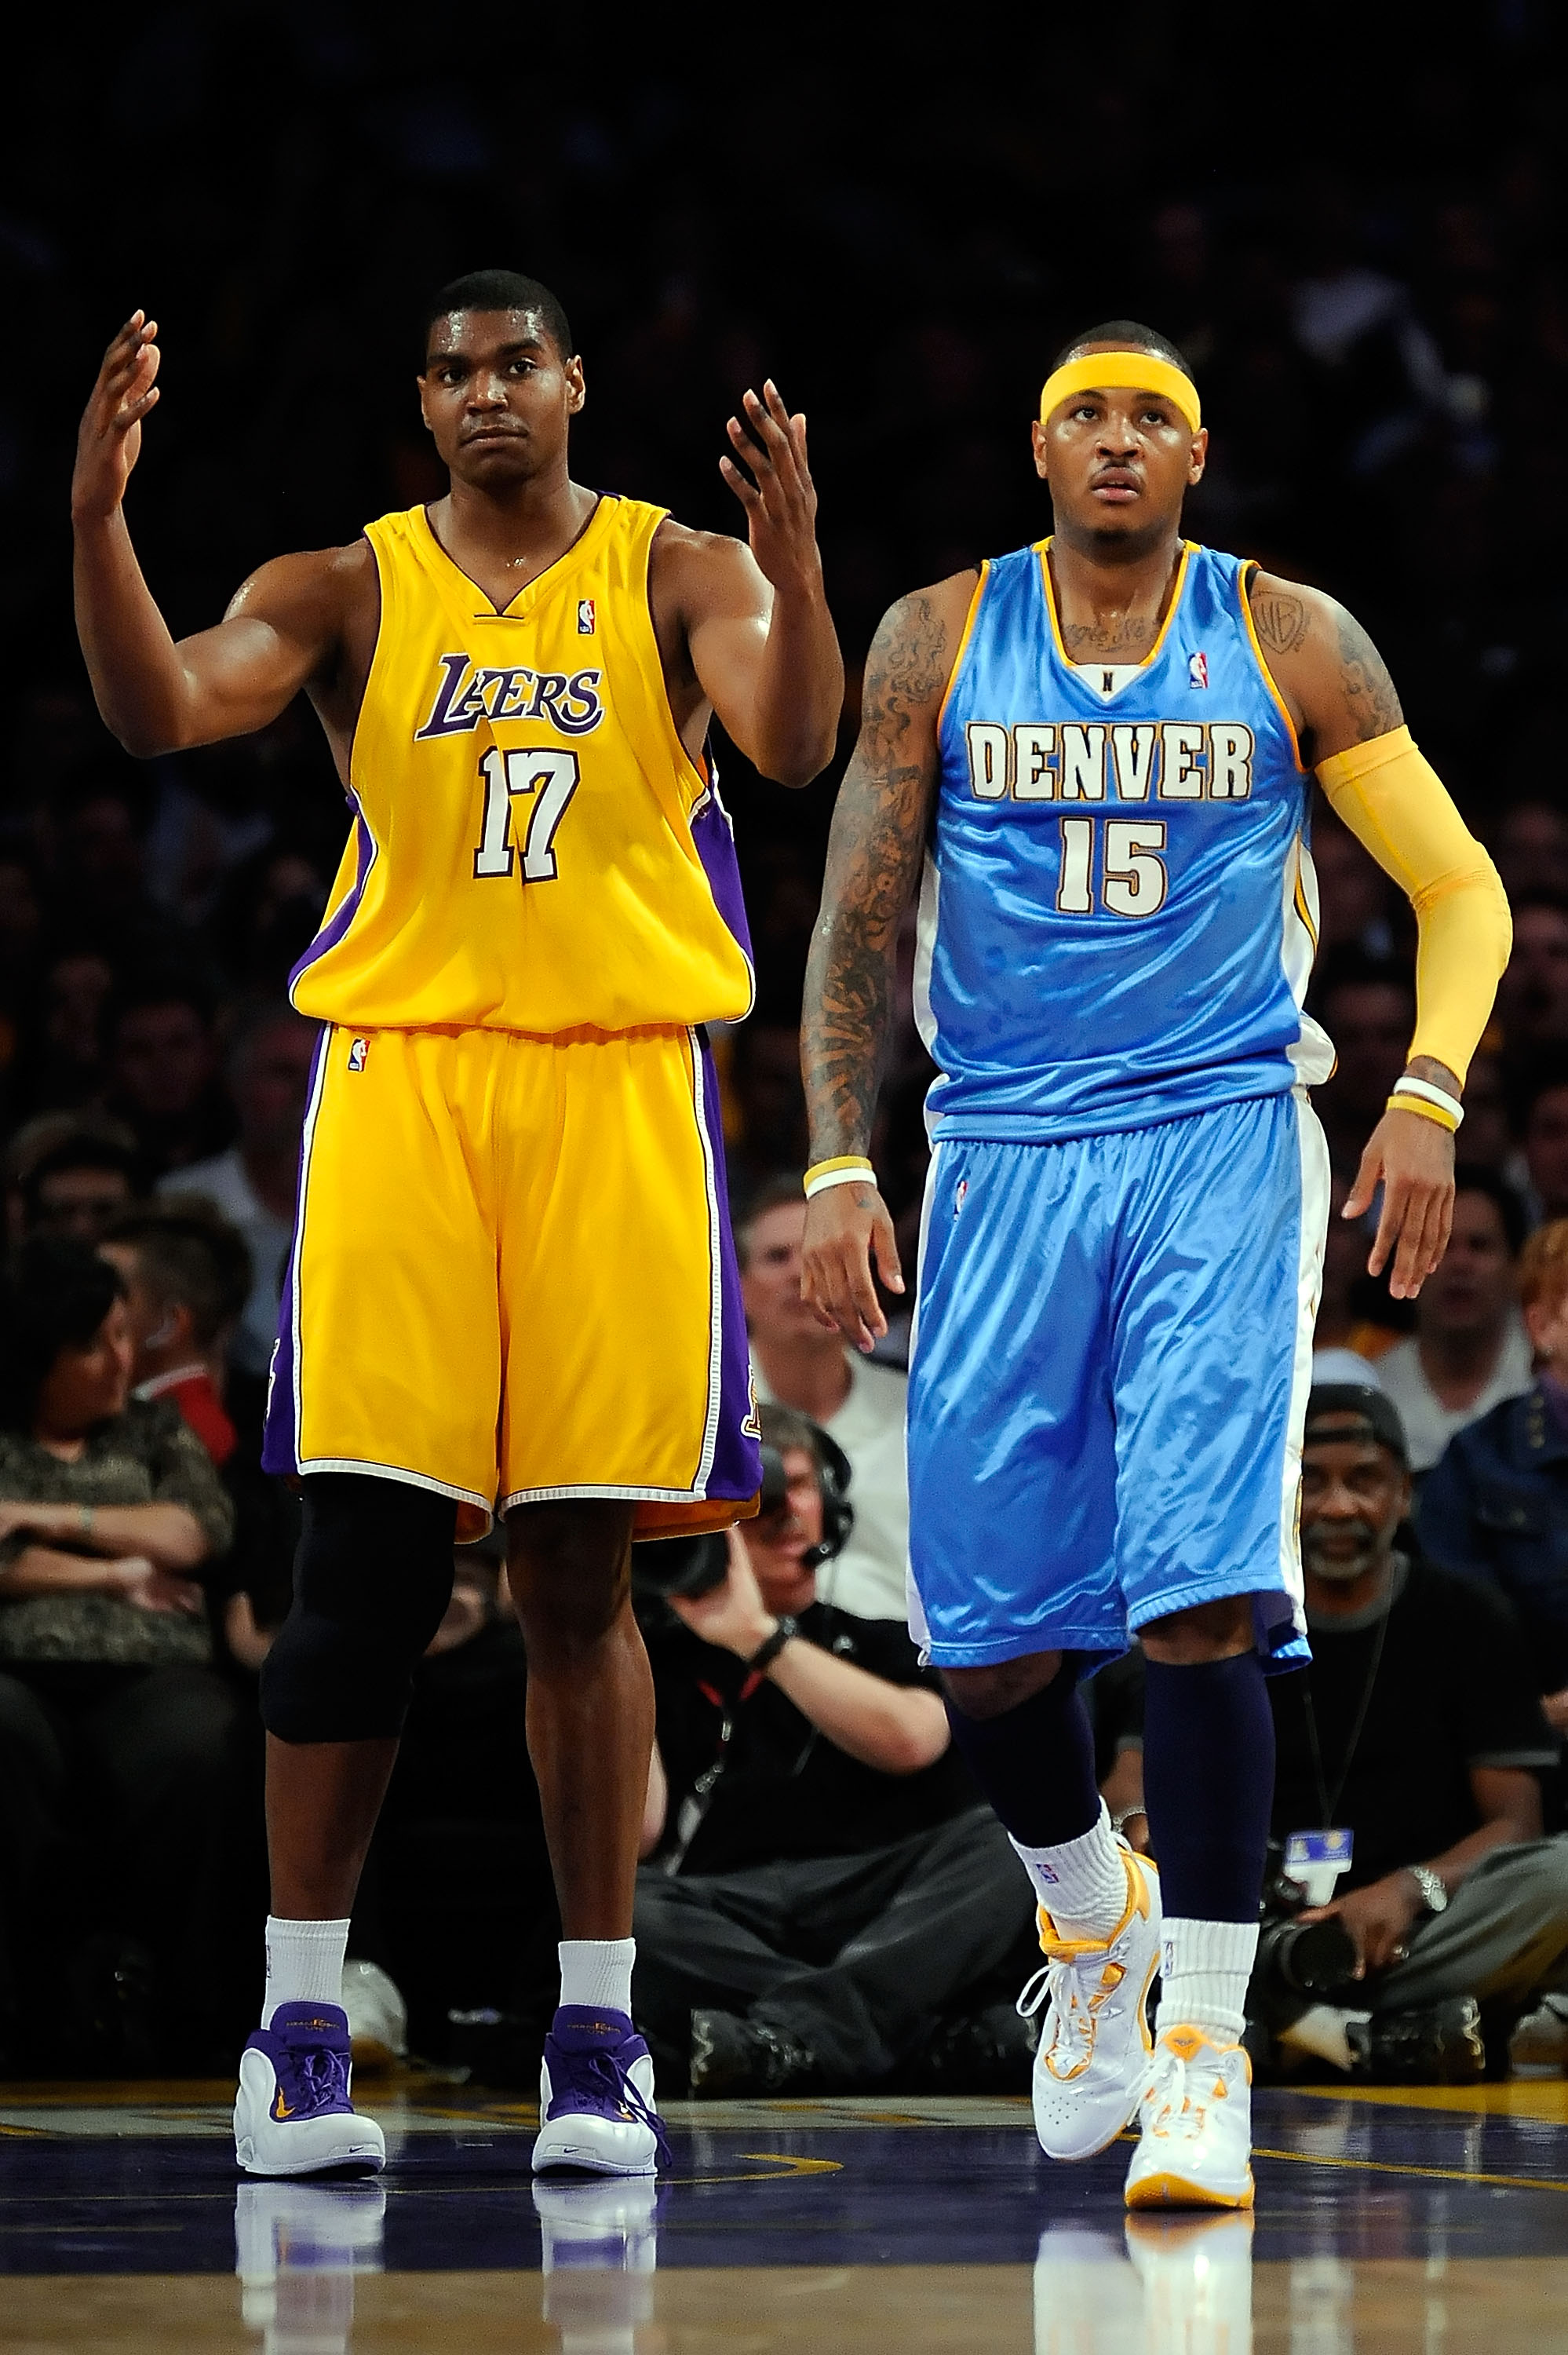 LOS ANGELES, CA - MAY 27:  Andrew Bynum #17 of the Los Angeles Lakers reacts next to Carmelo Anthony #15 of the Denver Nuggets in the first half of Game Five of the Western Conference Finals during the 2009 NBA Playoffs at Staples Center on May 27, 2009 i